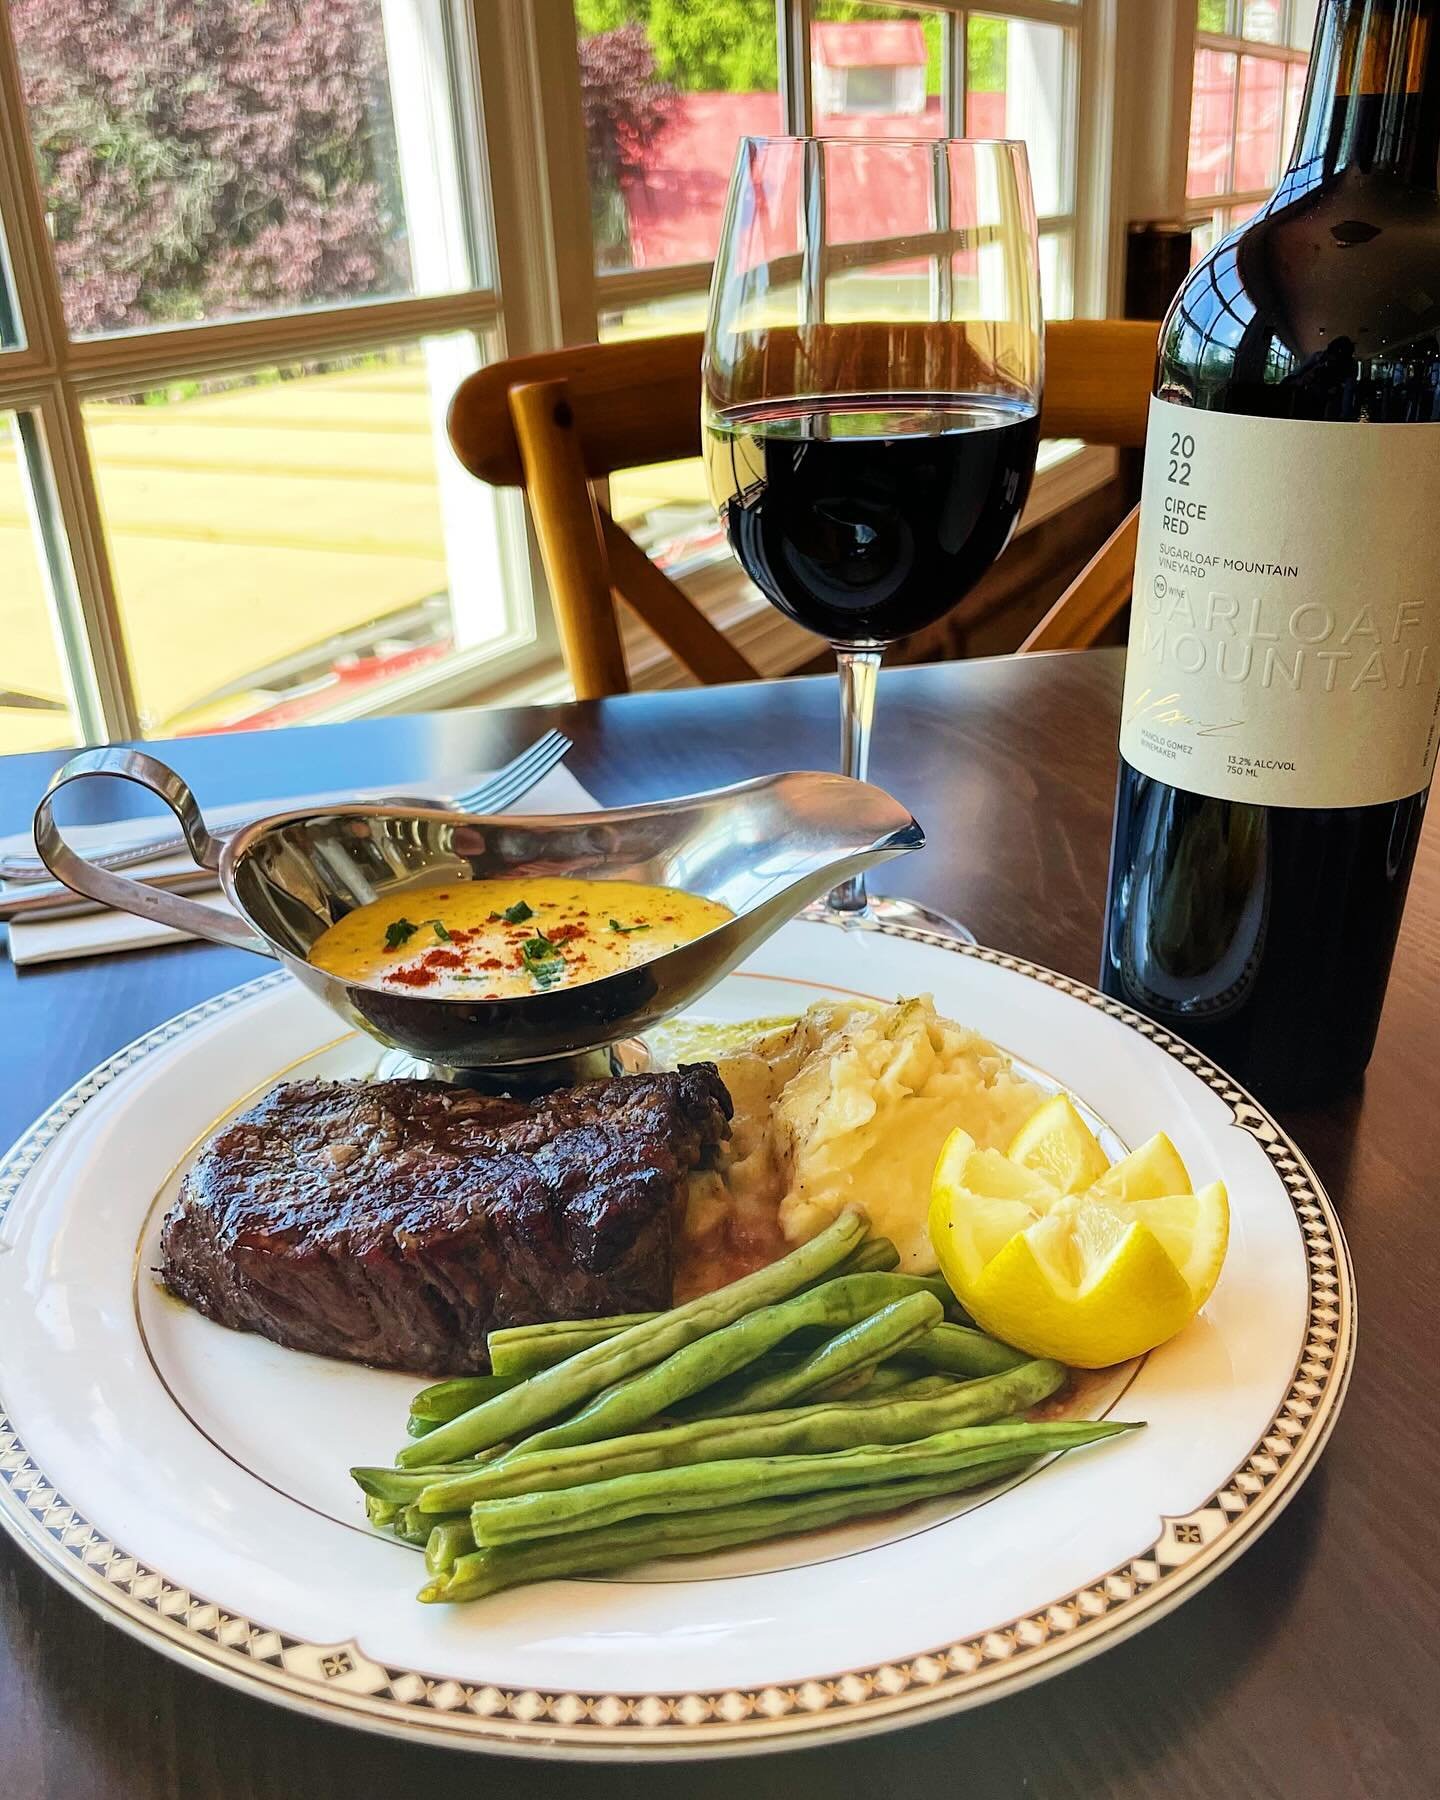 Have we got a treat for moms this Sunday 💕
The most delicious and perfectly cooked filet from our friends at Deer Vally Farms, buttery pommes puree, French green beans, and that decadent B&eacute;arnaise sauce 🍷 
Don&rsquo;t forget dessert! 
House-